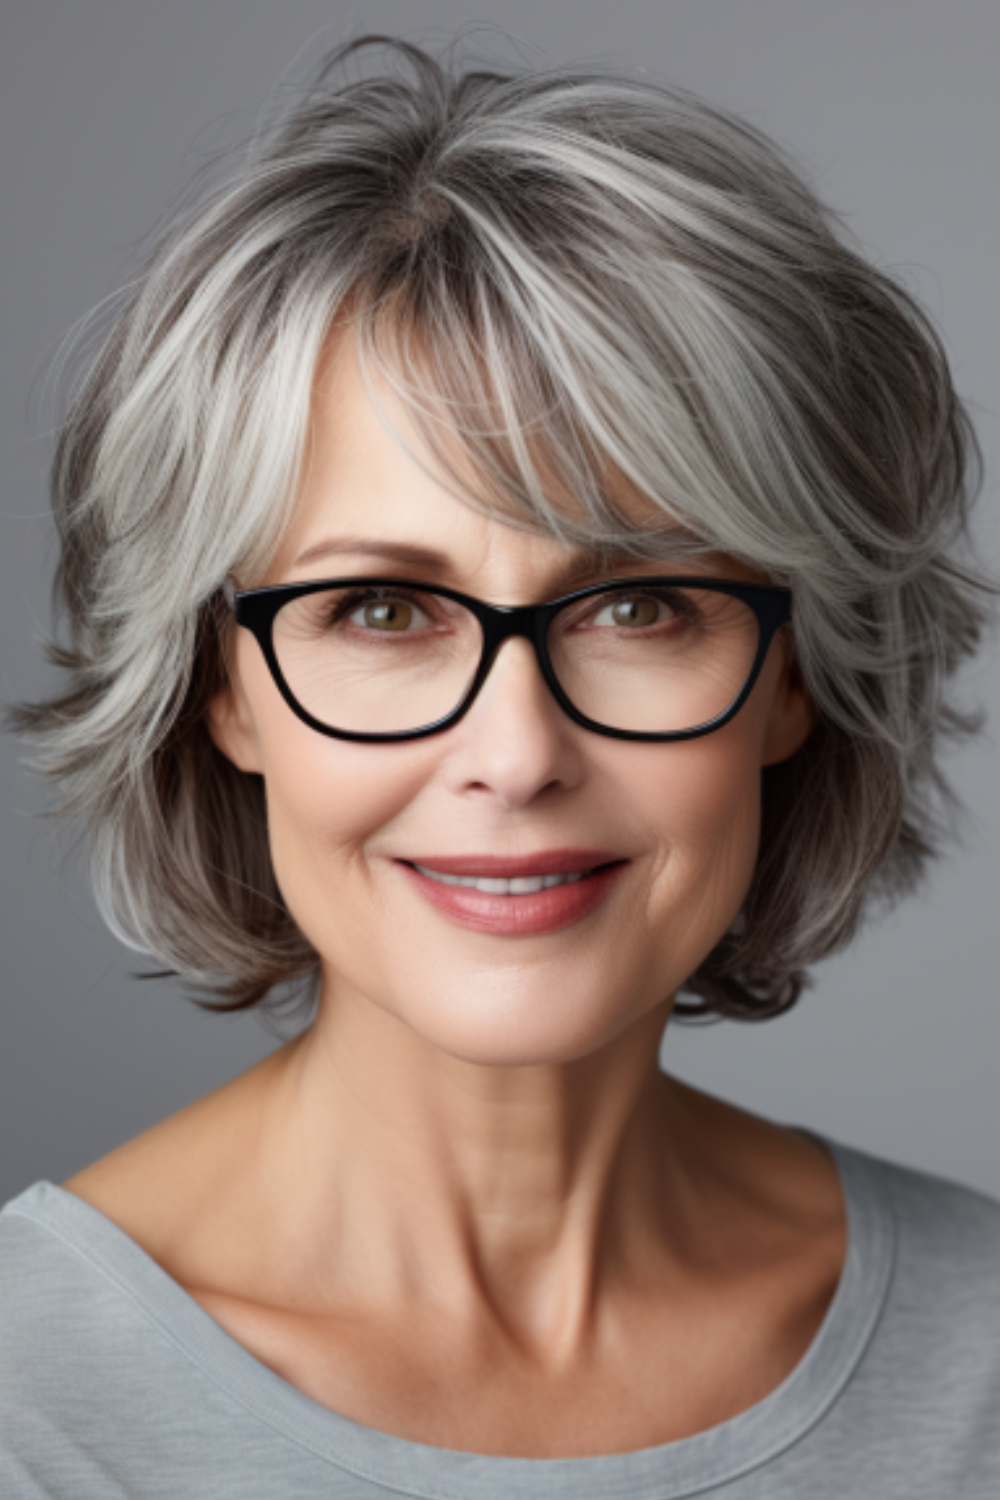 Stylish and Timeless: The Best Hairstyles for Older Women